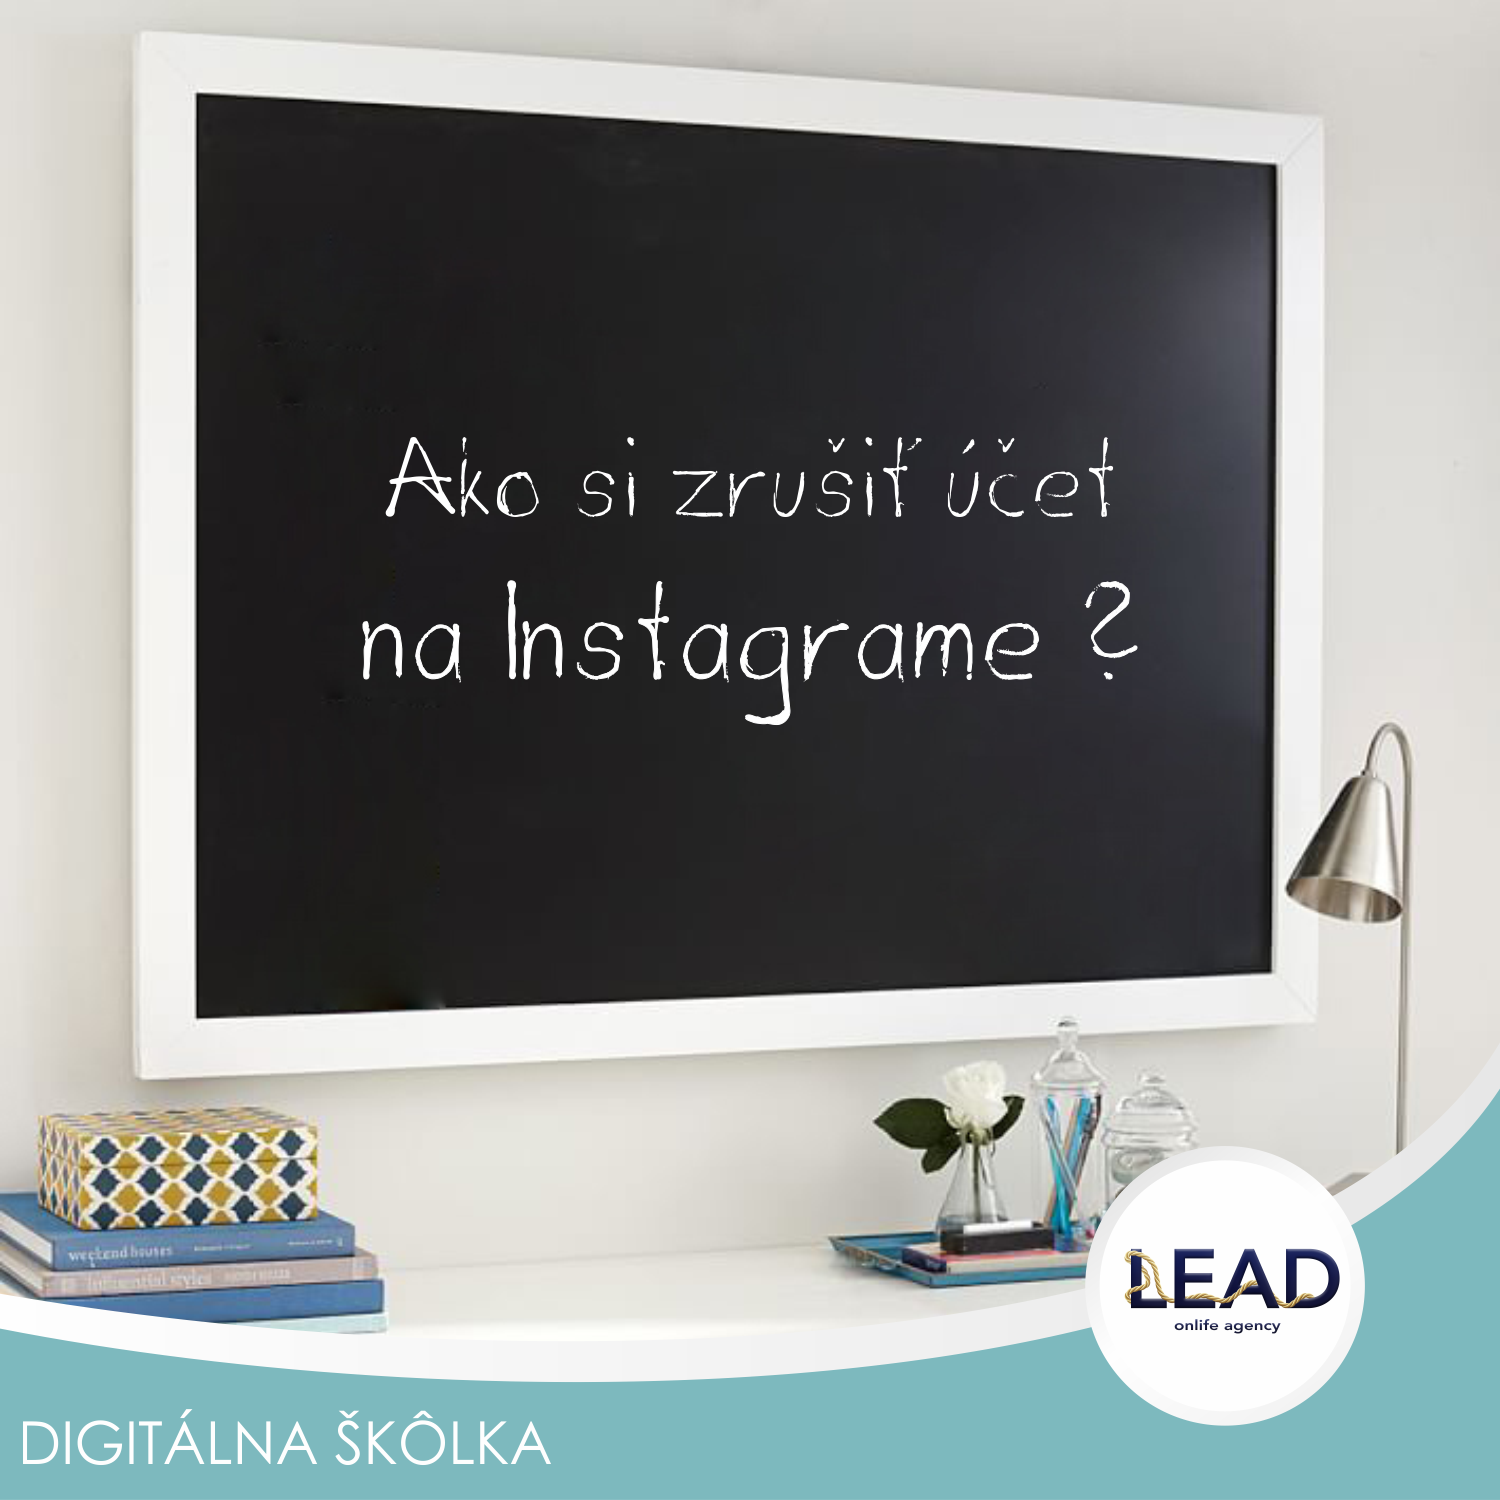 Lead sk online marketing - Ako si zrusit ucet na Instagrame